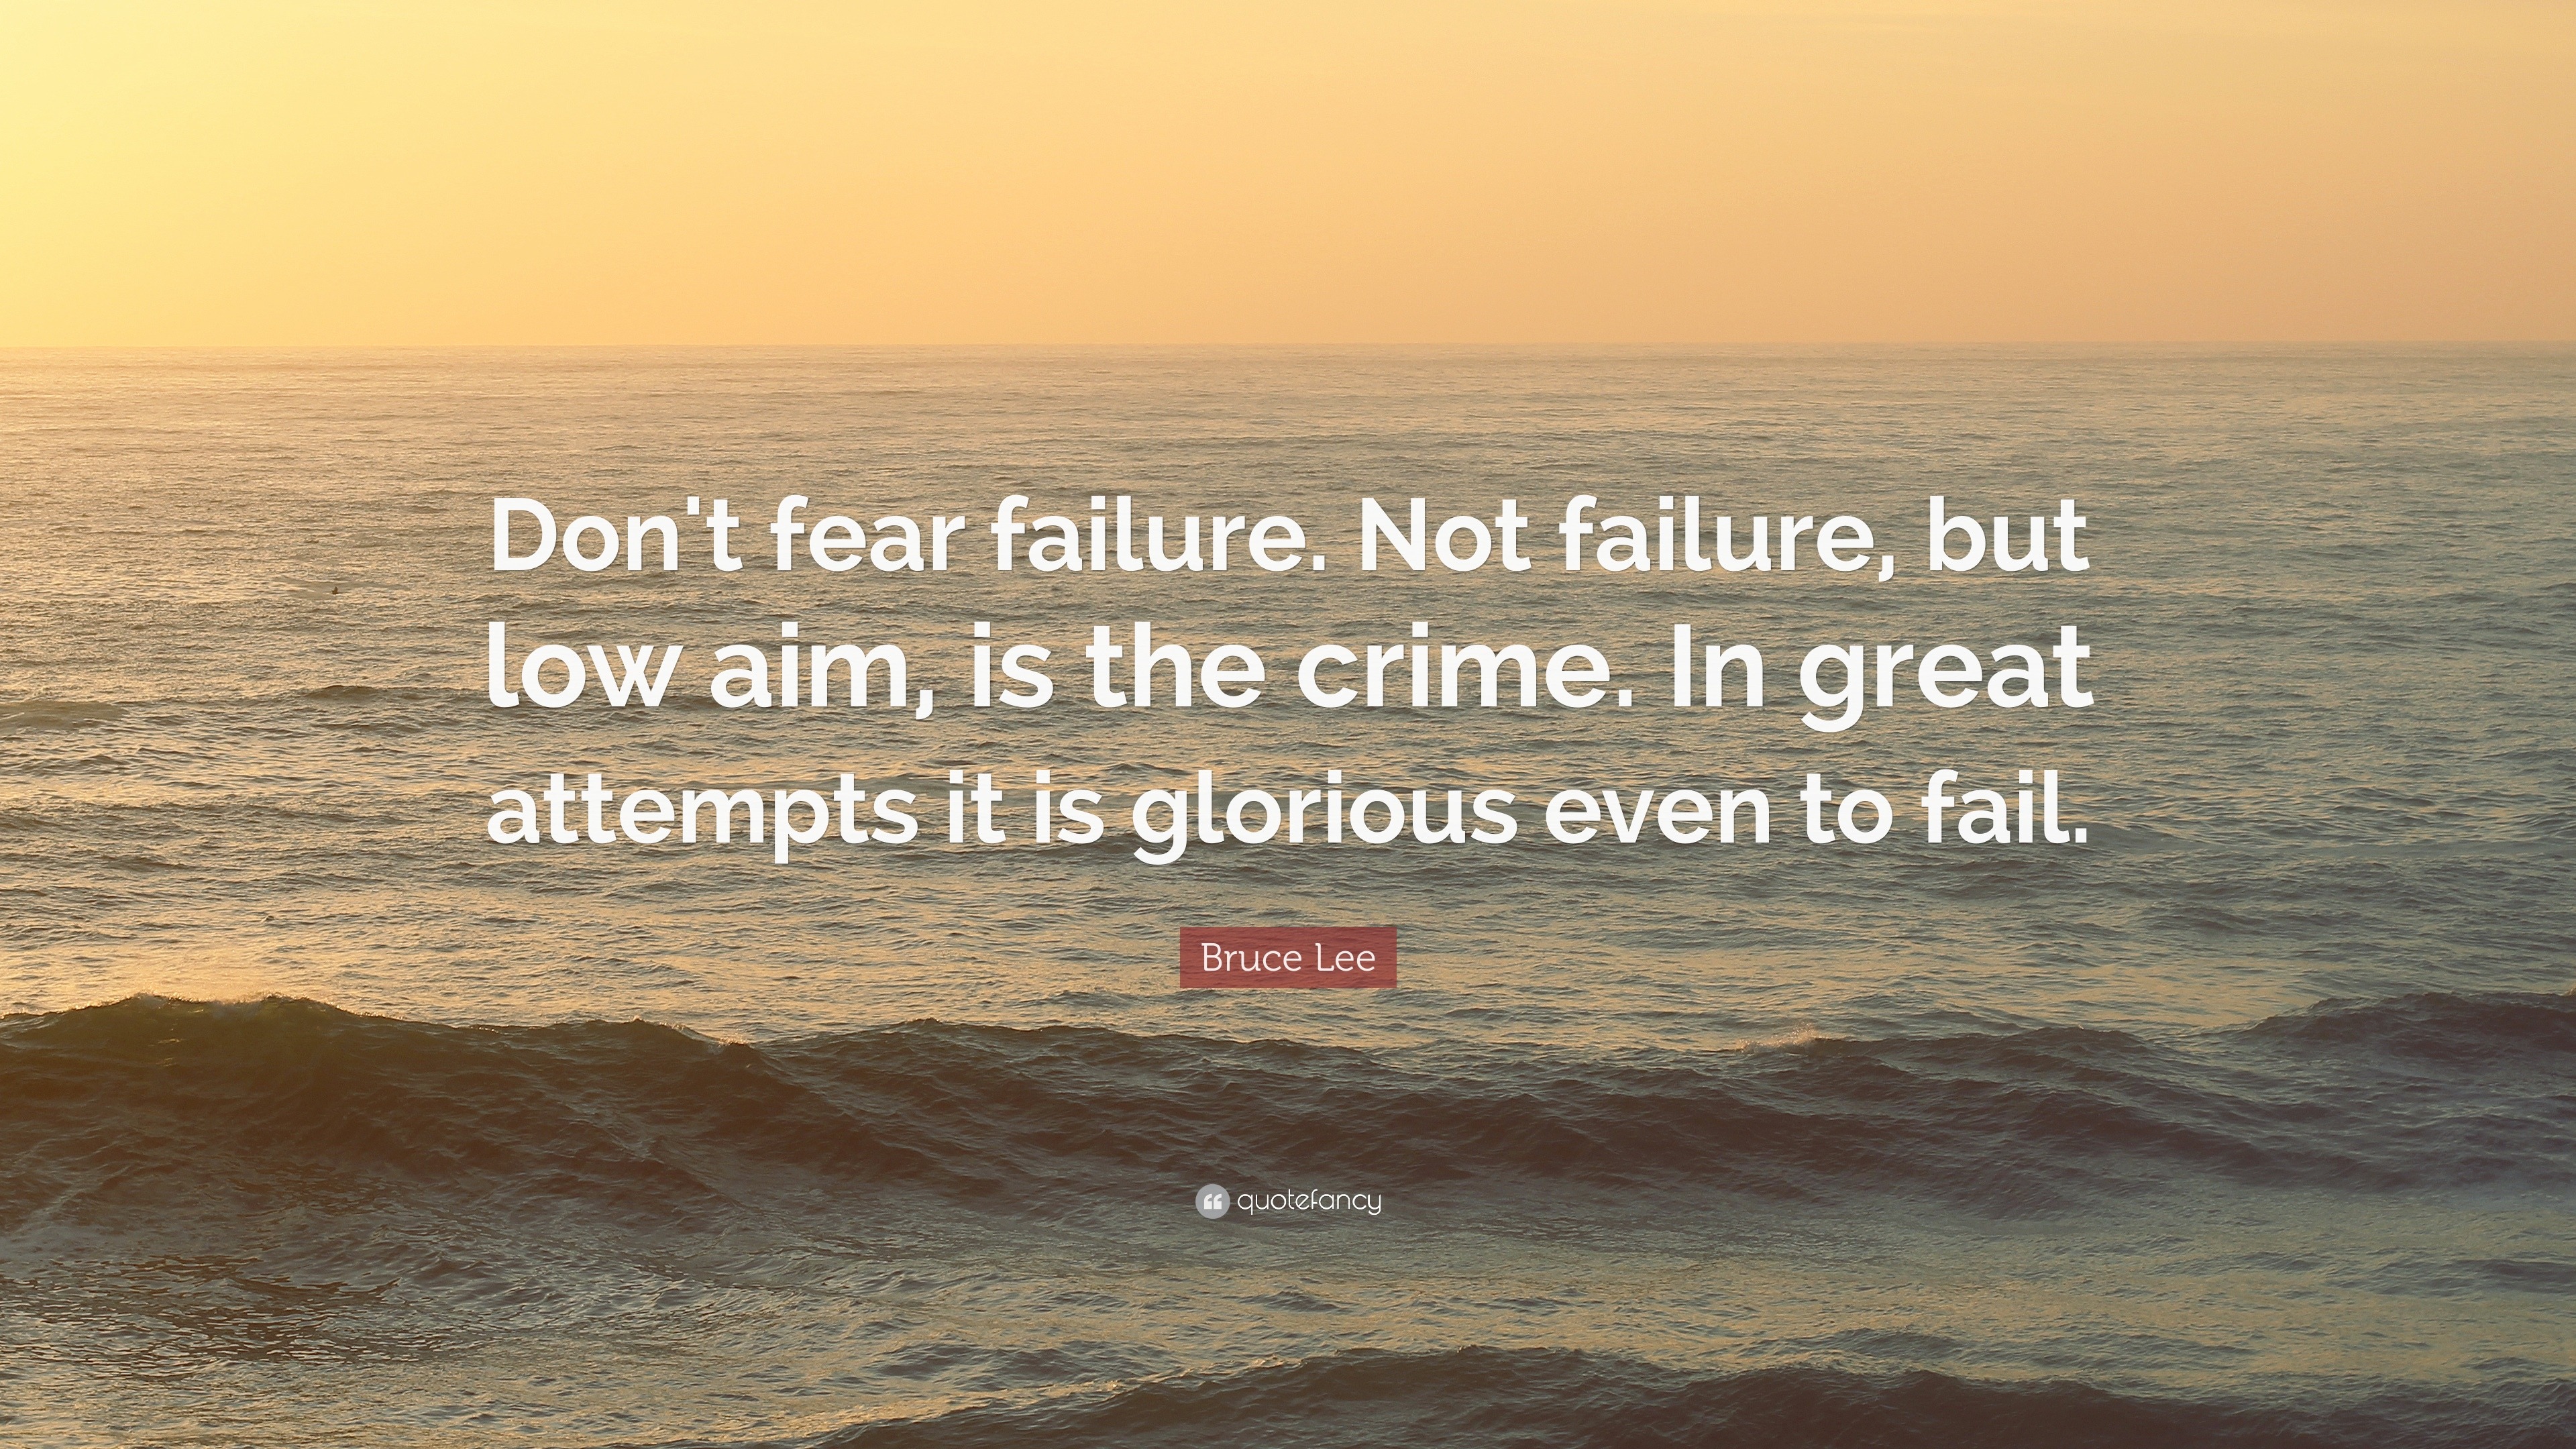 Bruce Lee Quote: “Don't fear failure. Not failure, but low aim, is the